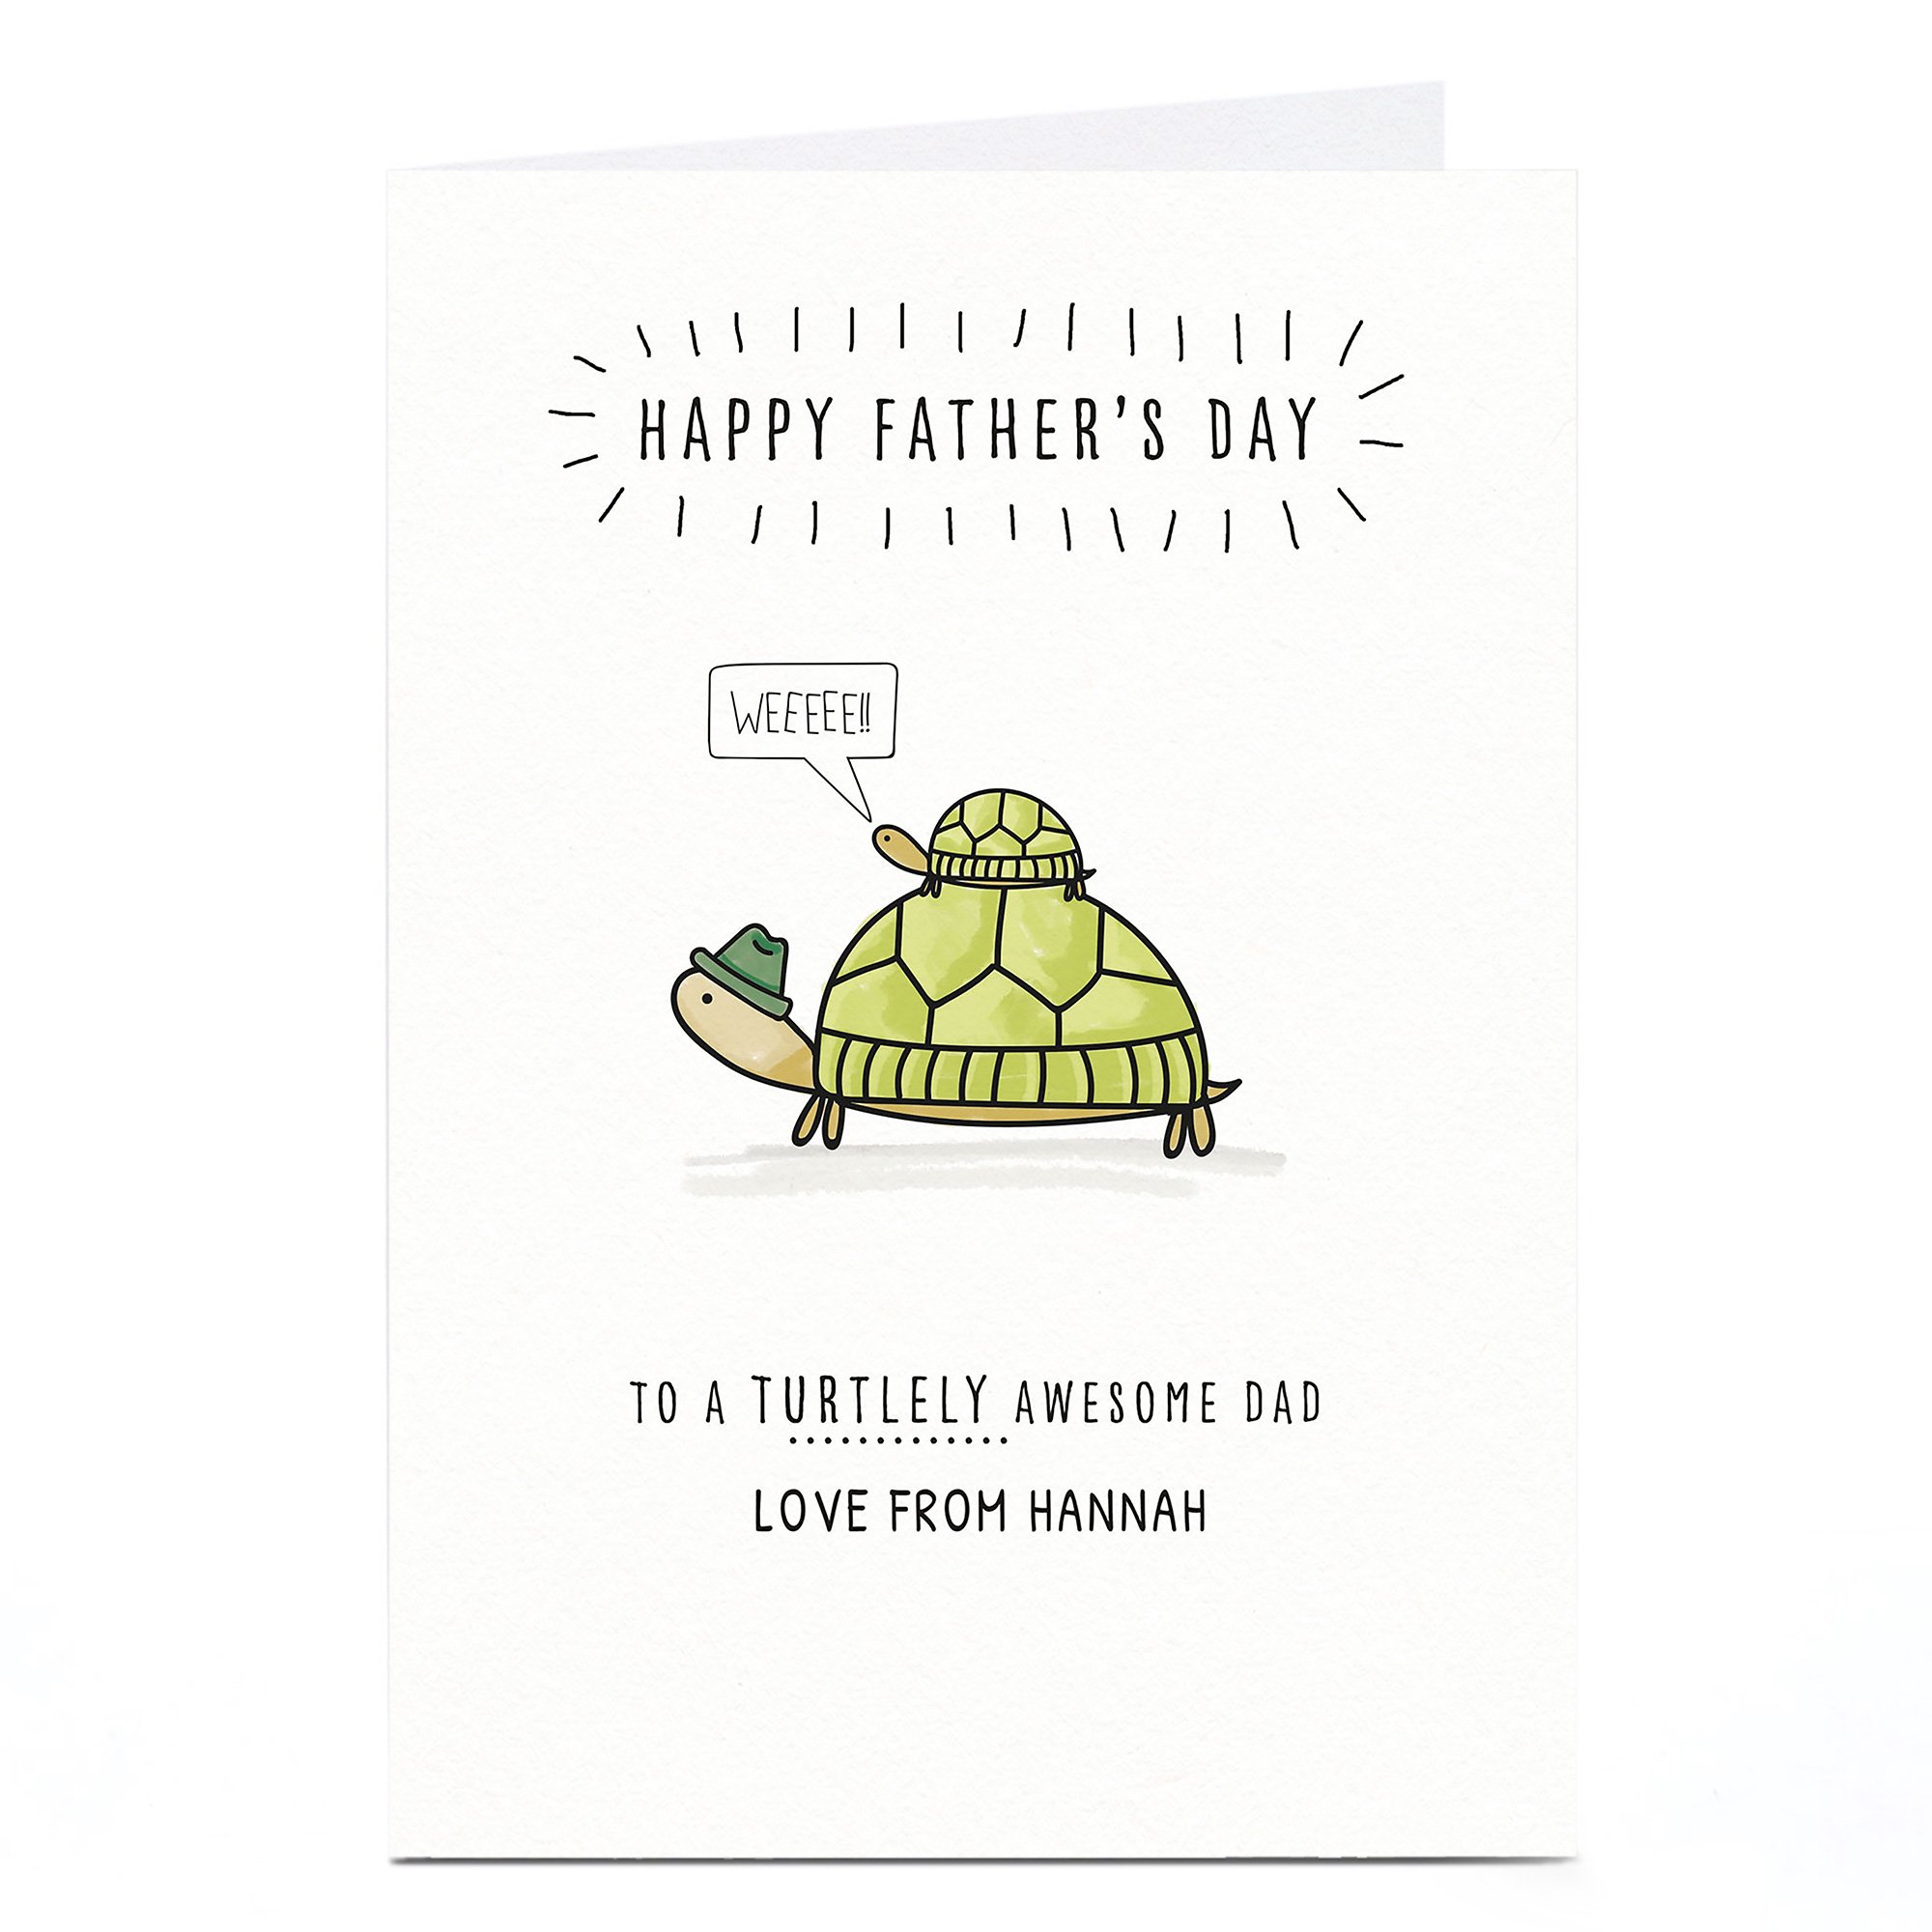 Personalised Father's Day Card - Turtlely Awesome